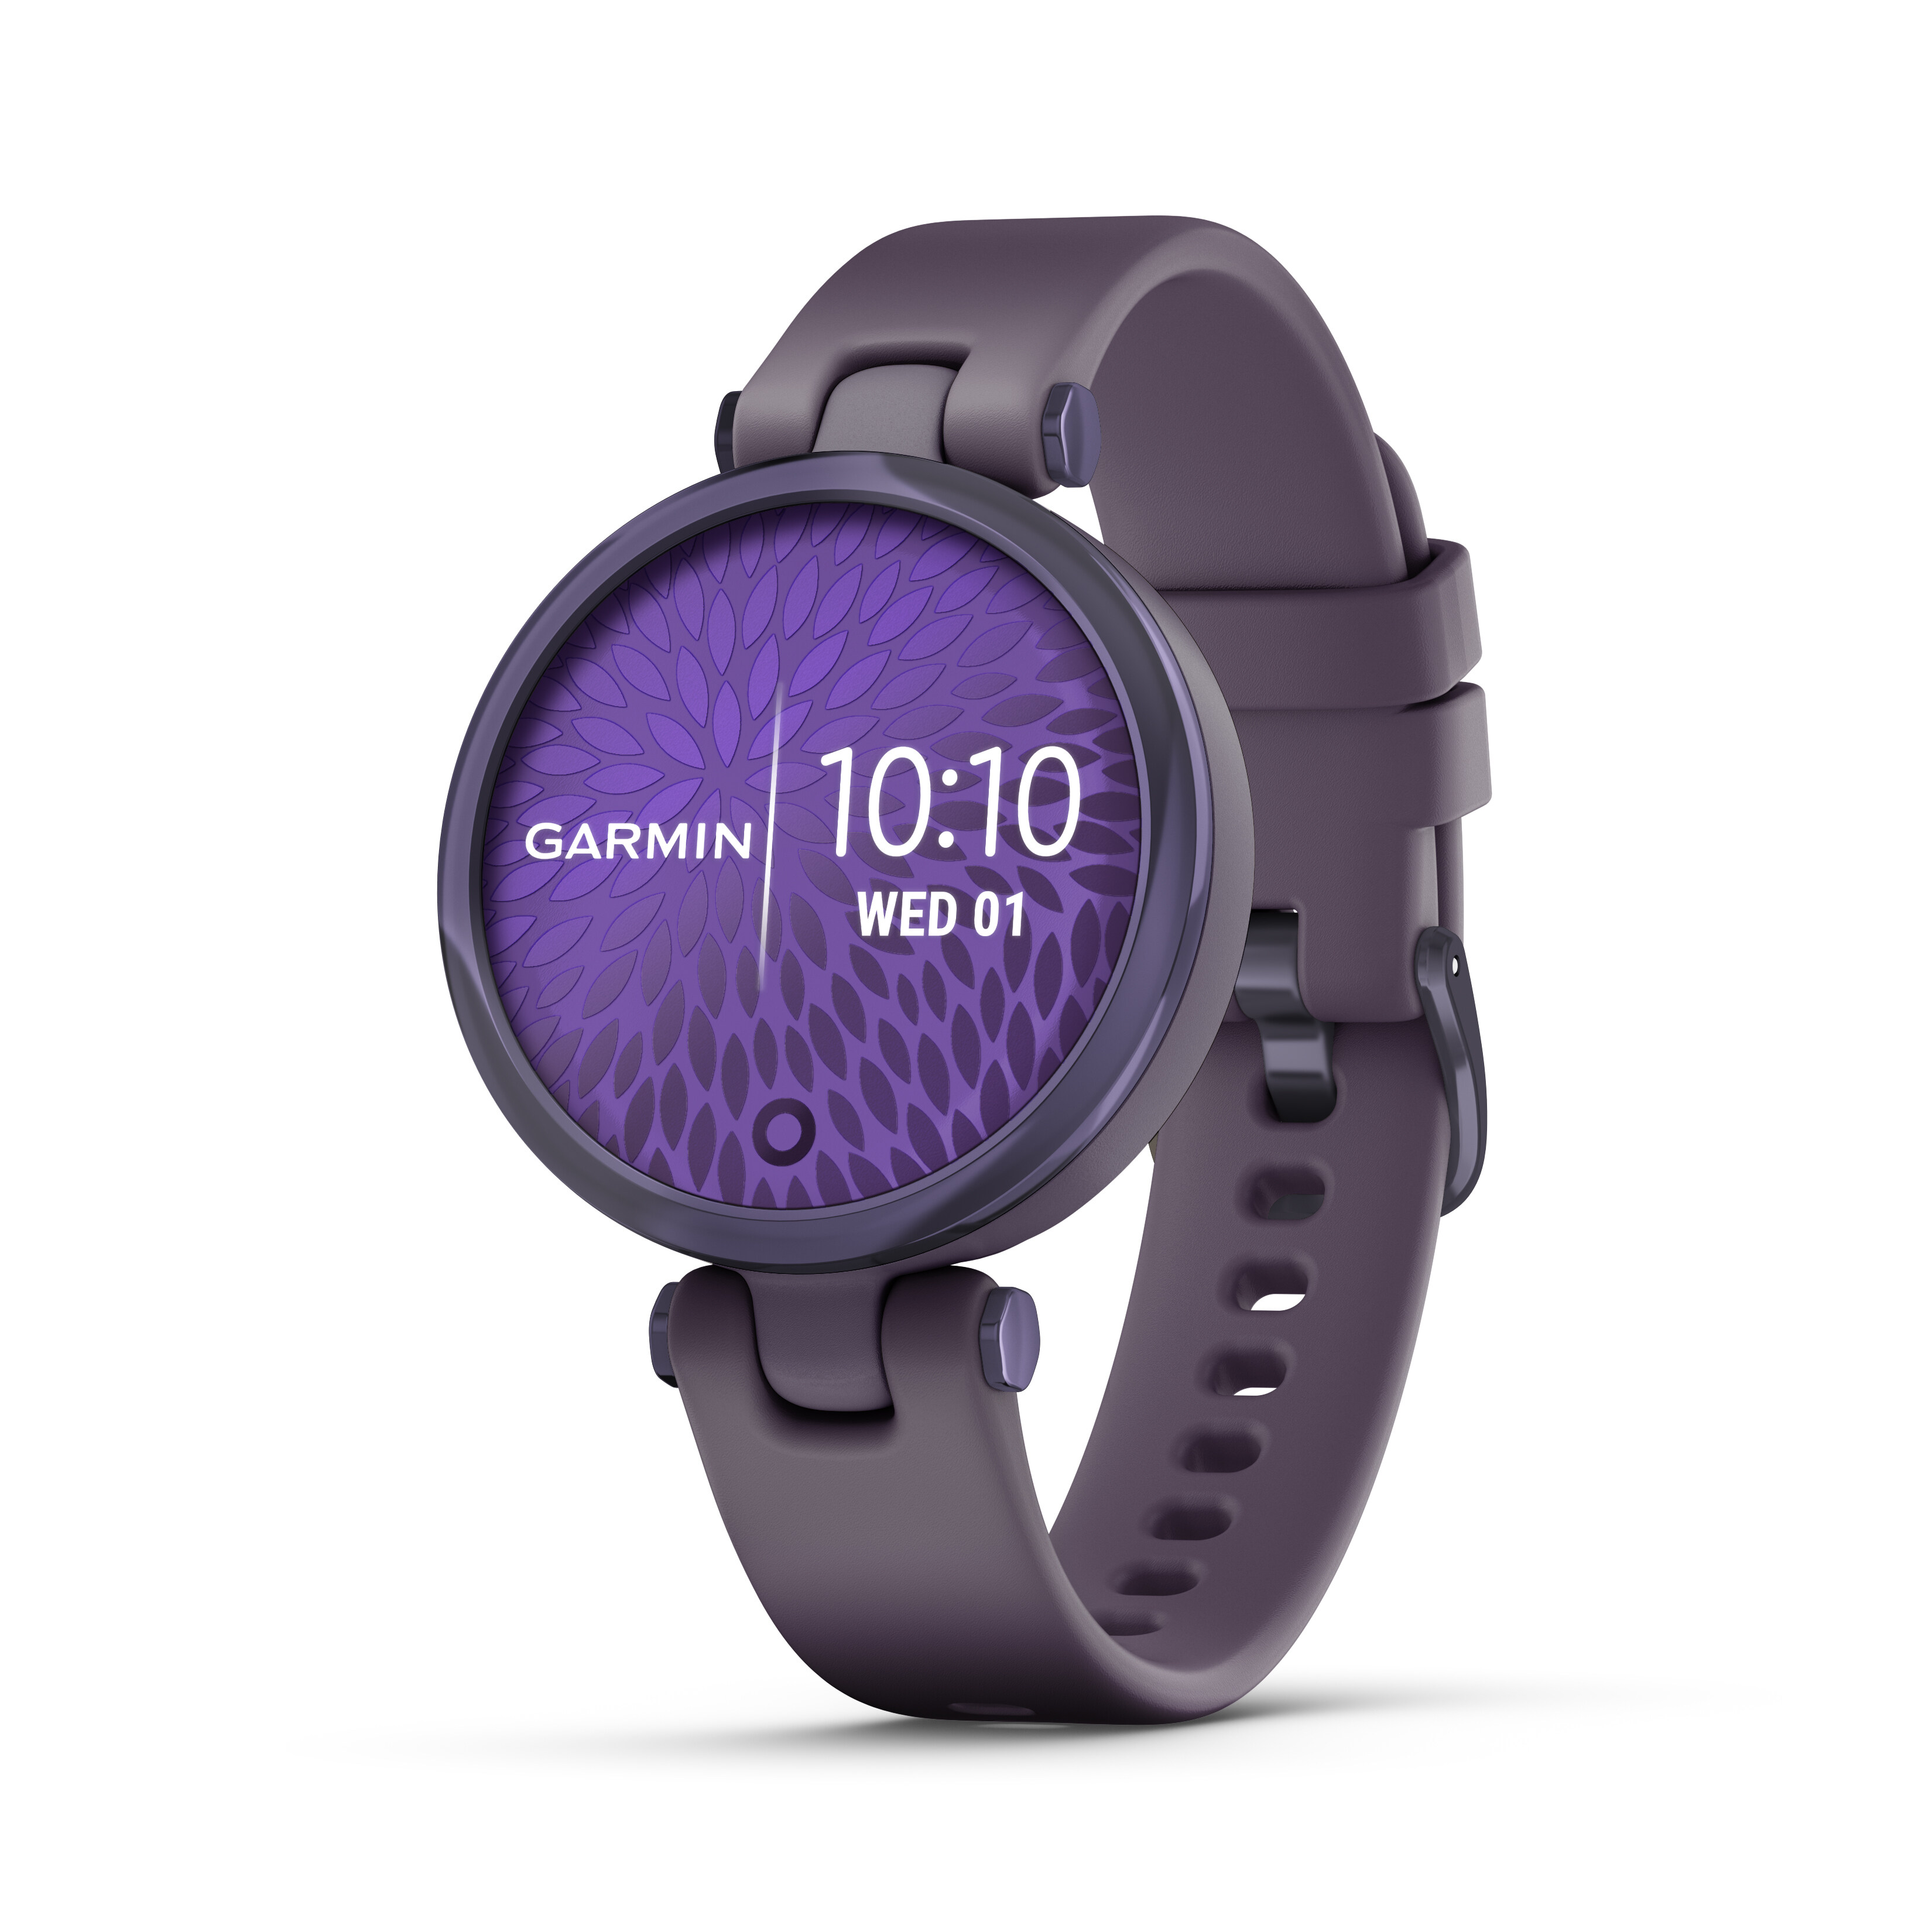 [NEW] Garmin Lily Smart Watch (Silicone) - Stylish Patterned Lens, Smart Touchscreen, Small and Fashionable smartwatch